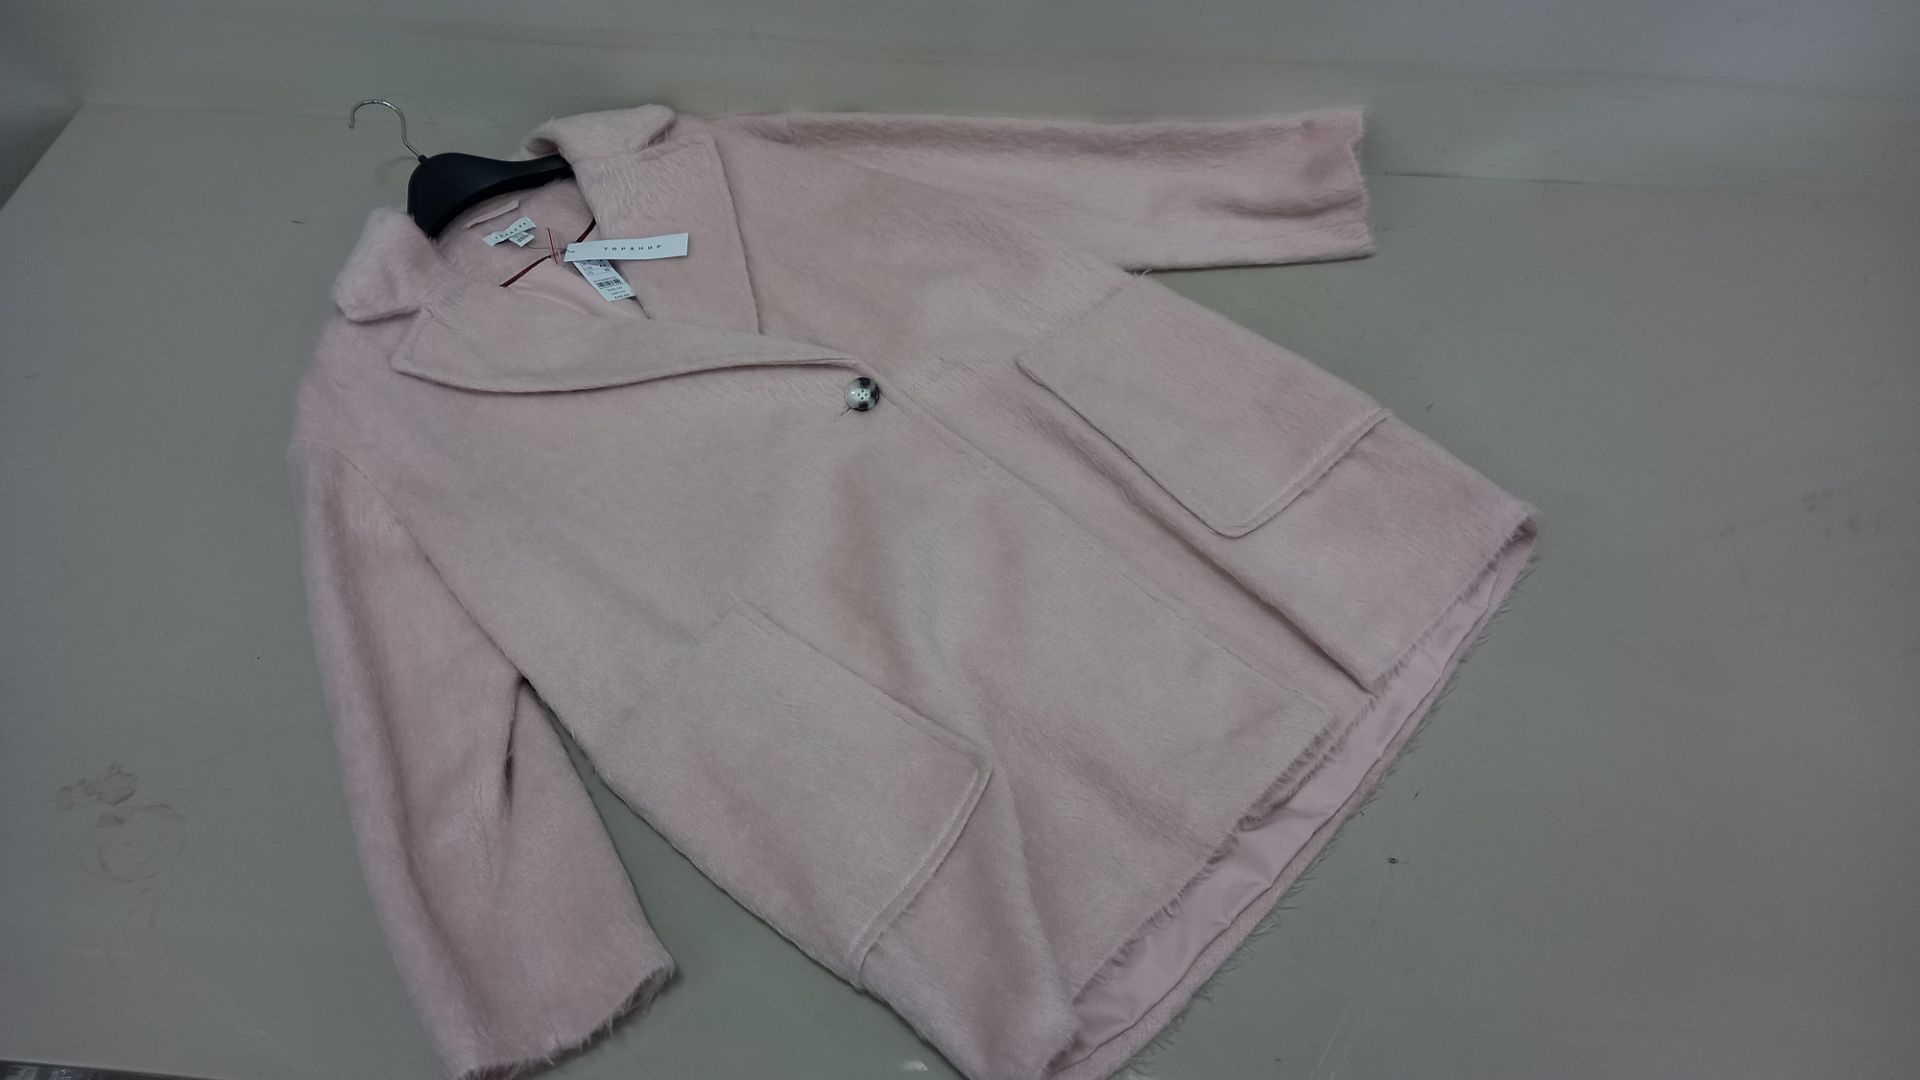 4 X BRAND NEW TOPSHOP PINK FUR BUTTONED COATS / JACKETS SIZE 12 RRP £65.00 (TOTAL RRP £260.00)